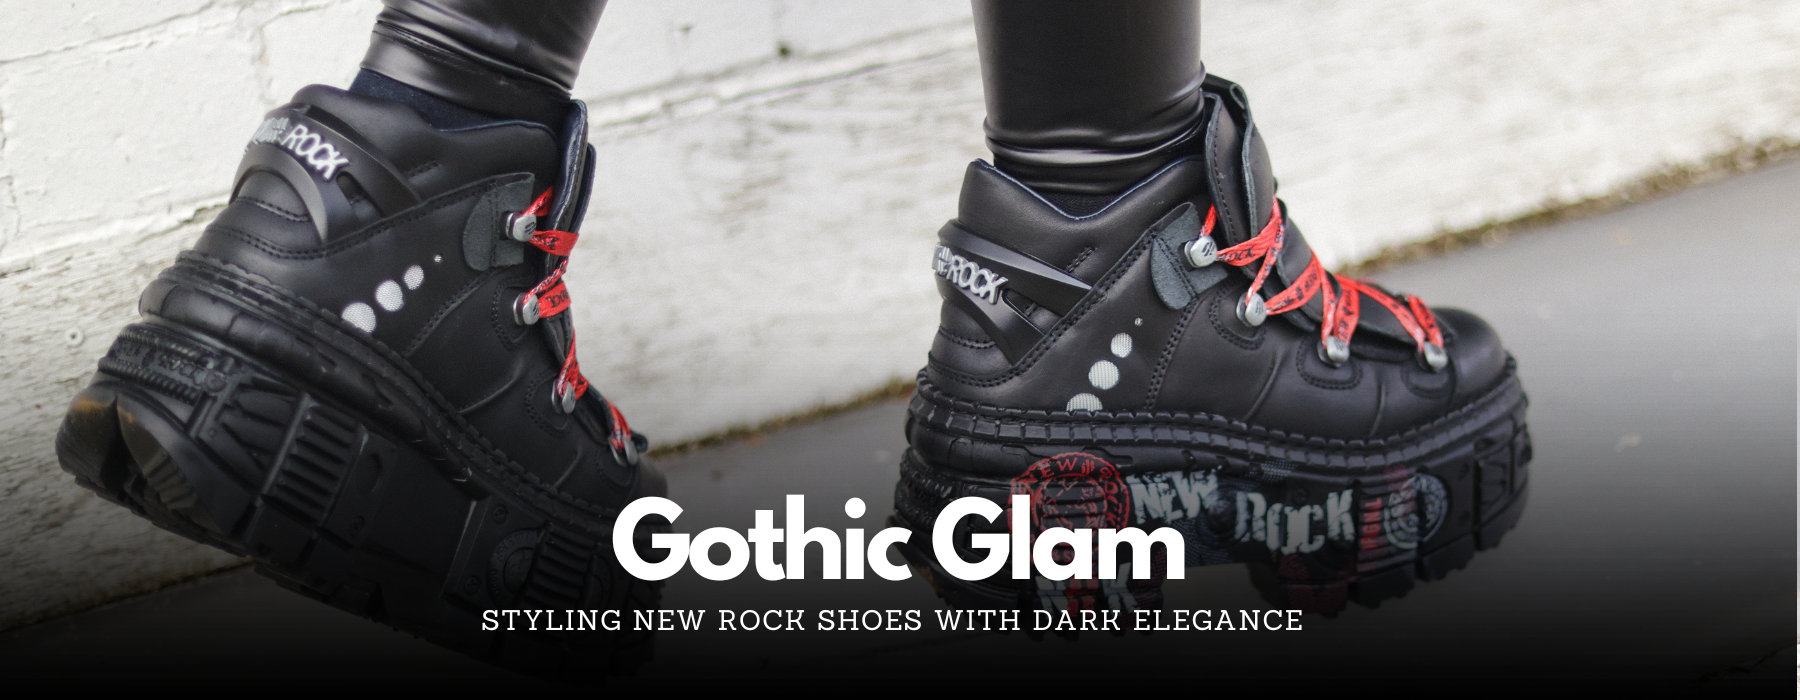 Gothic Glam: Styling New Rock Shoes with Dark Elegance